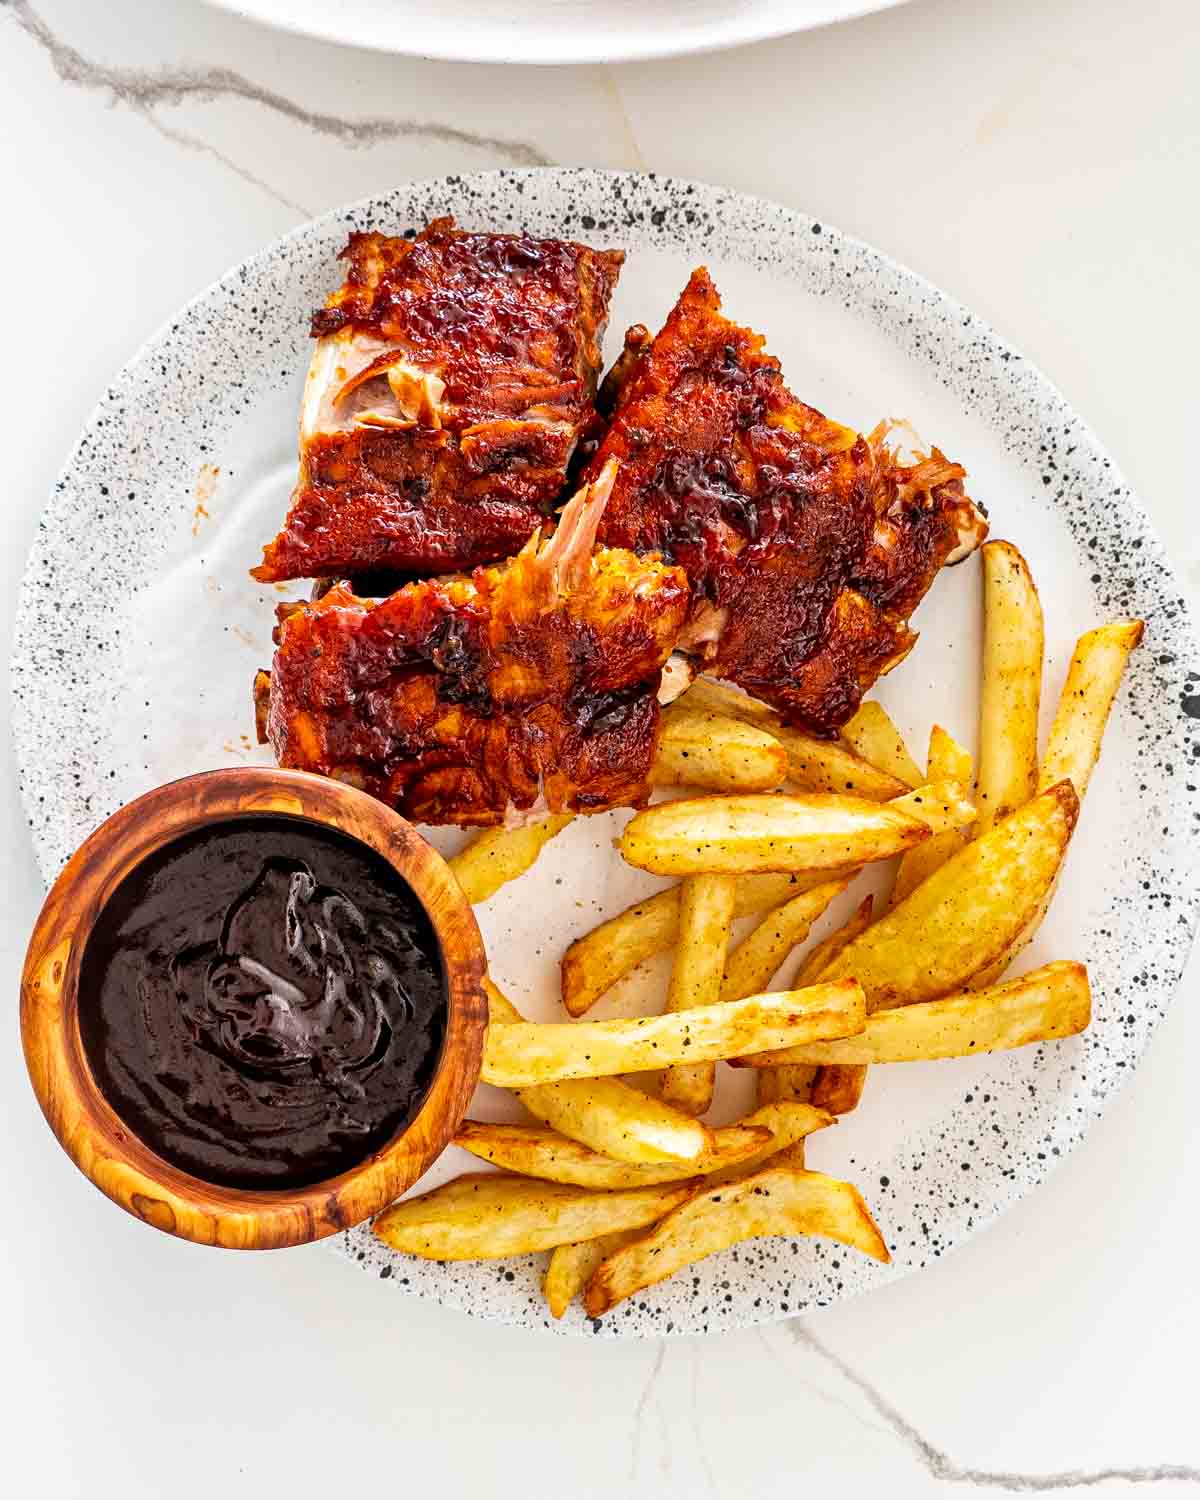 bbq ribs on a plate with french fries and bbq sauce.